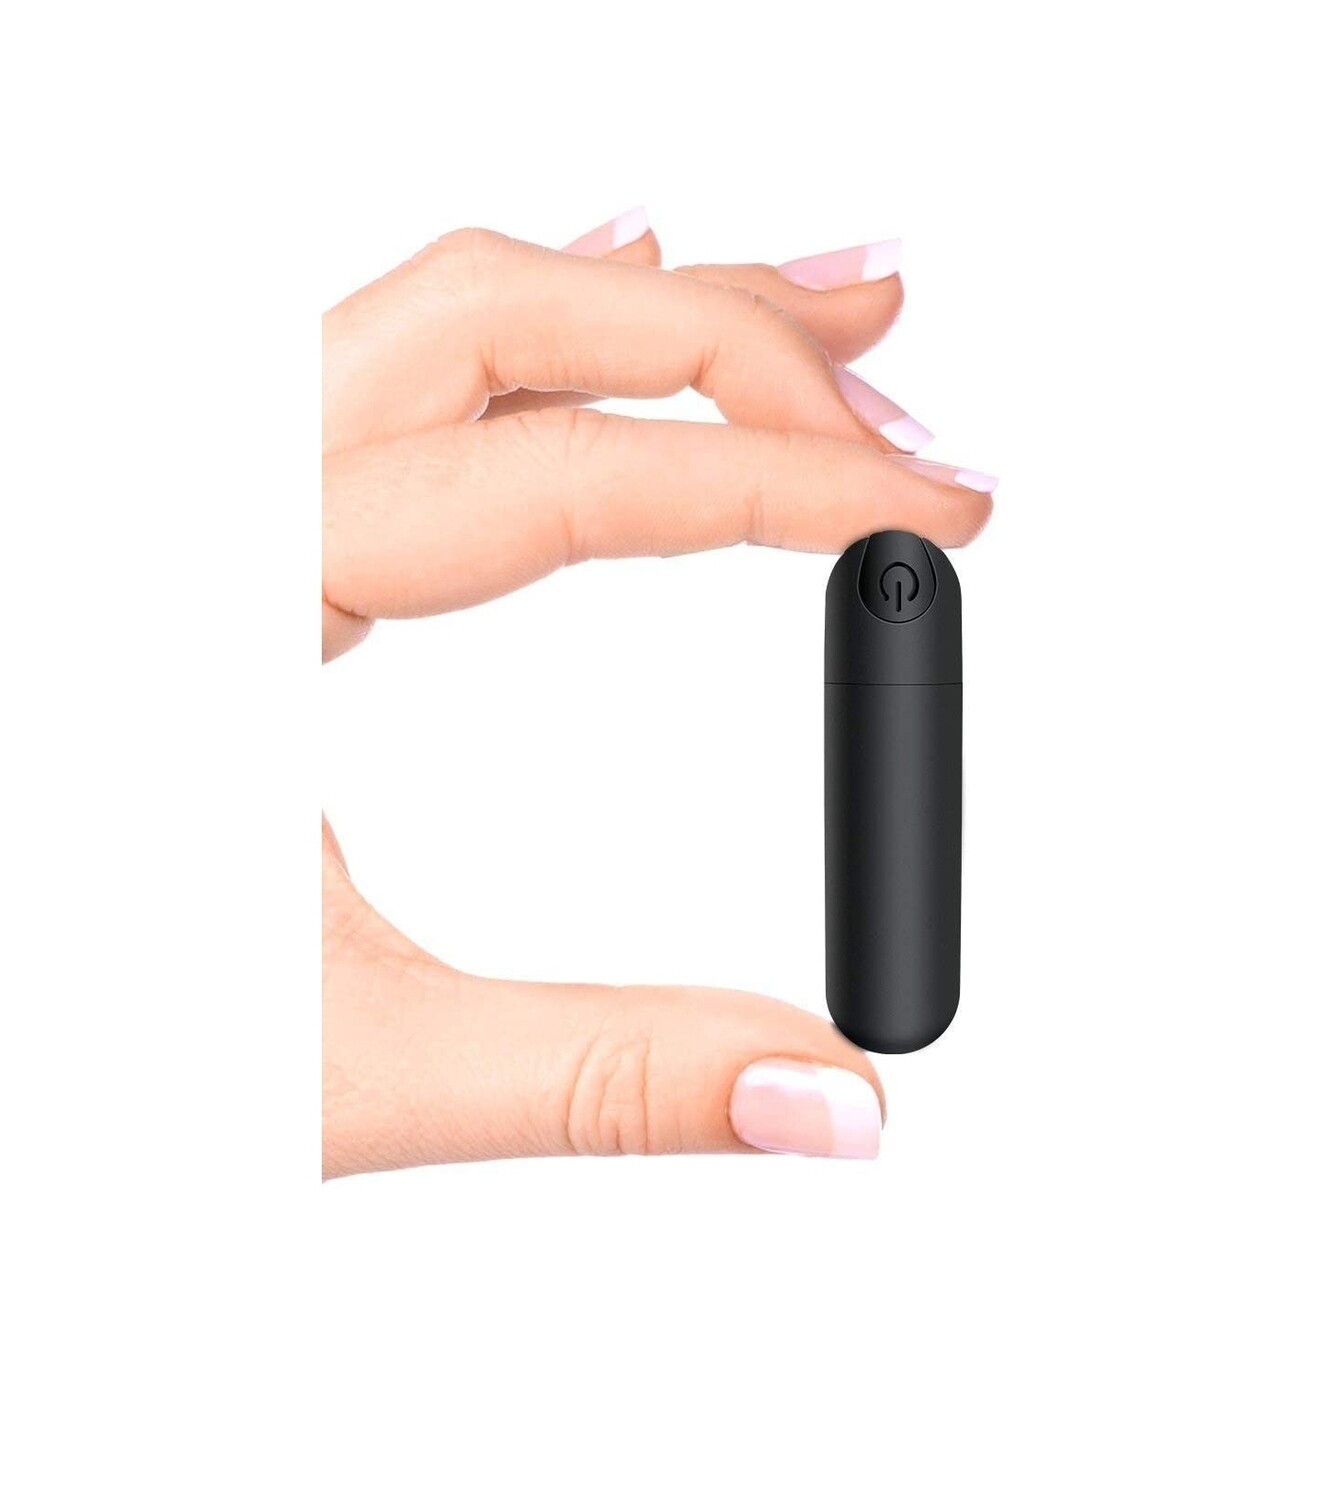 Rechargeable Vibrating Bullet